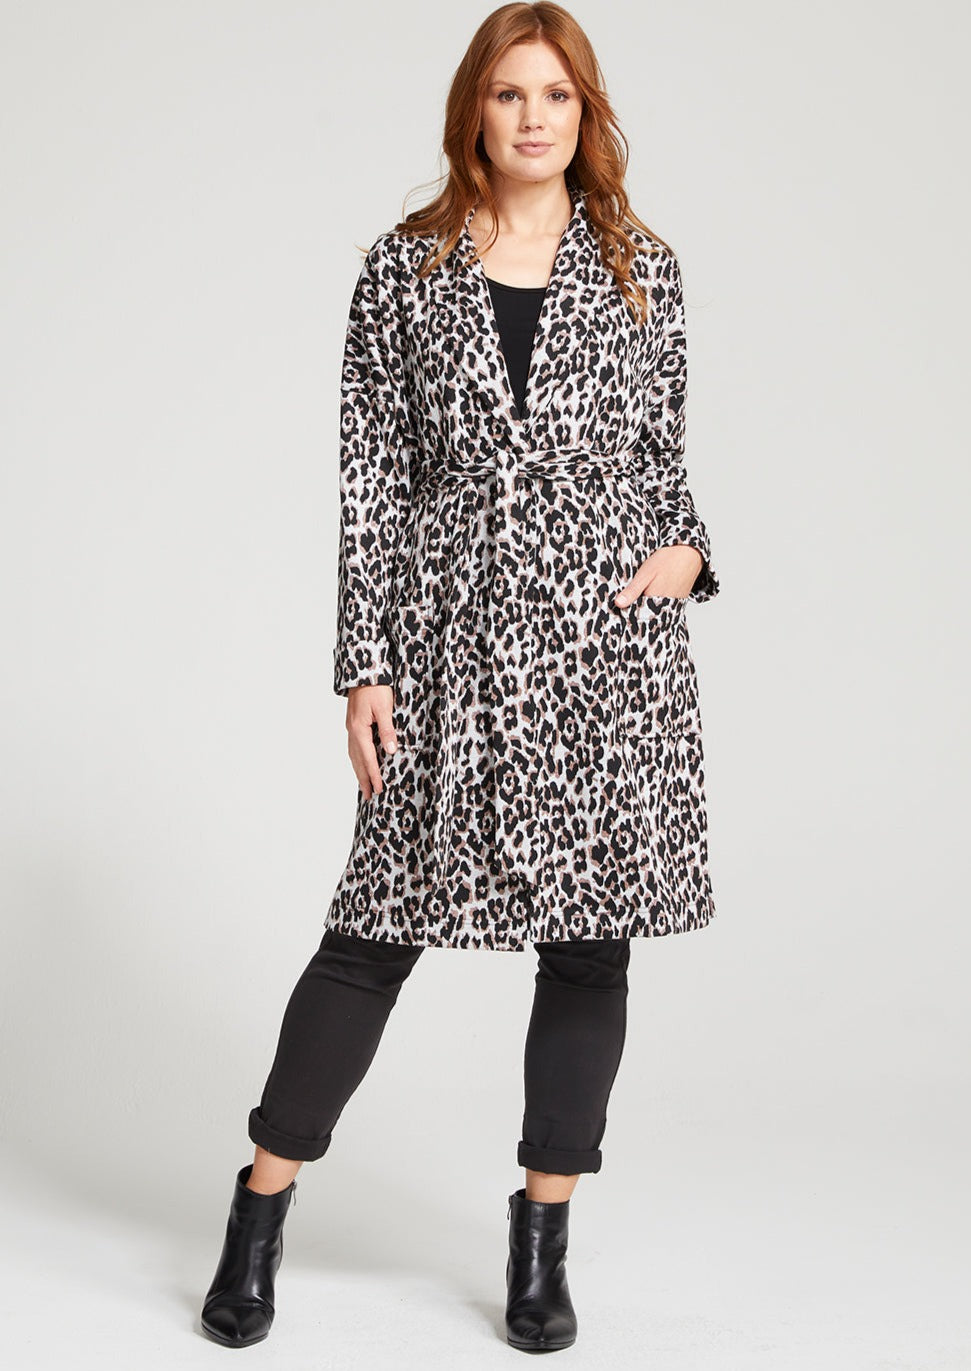 Robe style coat with centre front large black button to fasten or self tie belt. Large front patch pockets, full length sleeve, side split in hem. fabric is a jacquard, leopard ponte with lurex gold thread woven through. Made in Sydney, Australia by Philosophy Australia. 